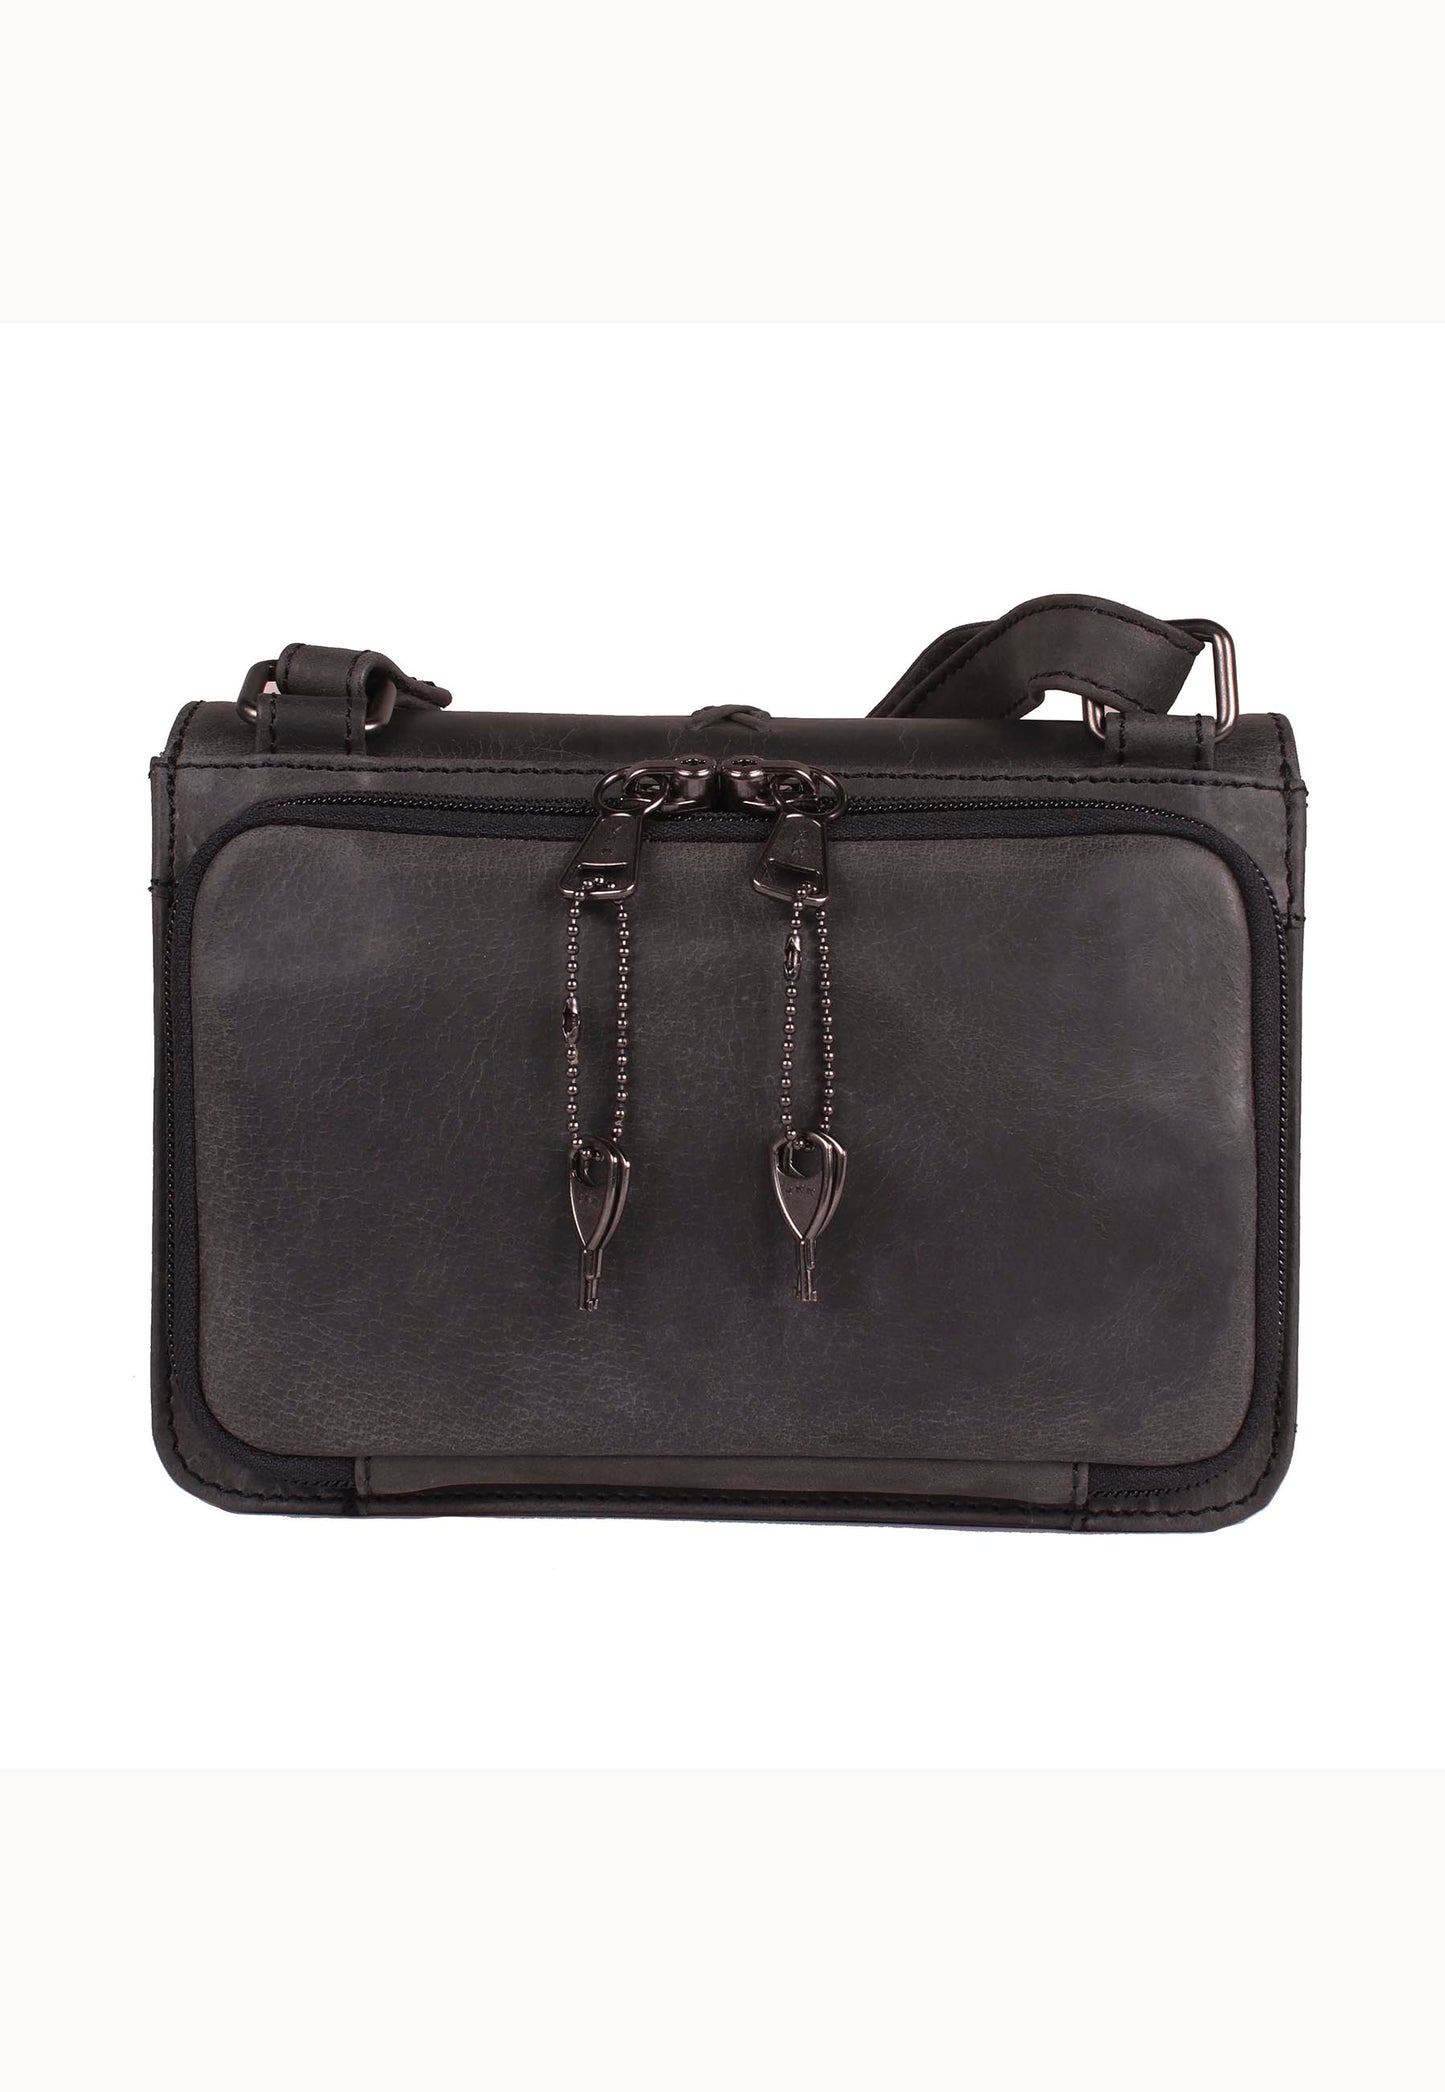 Black leather conceal carry fanny pack